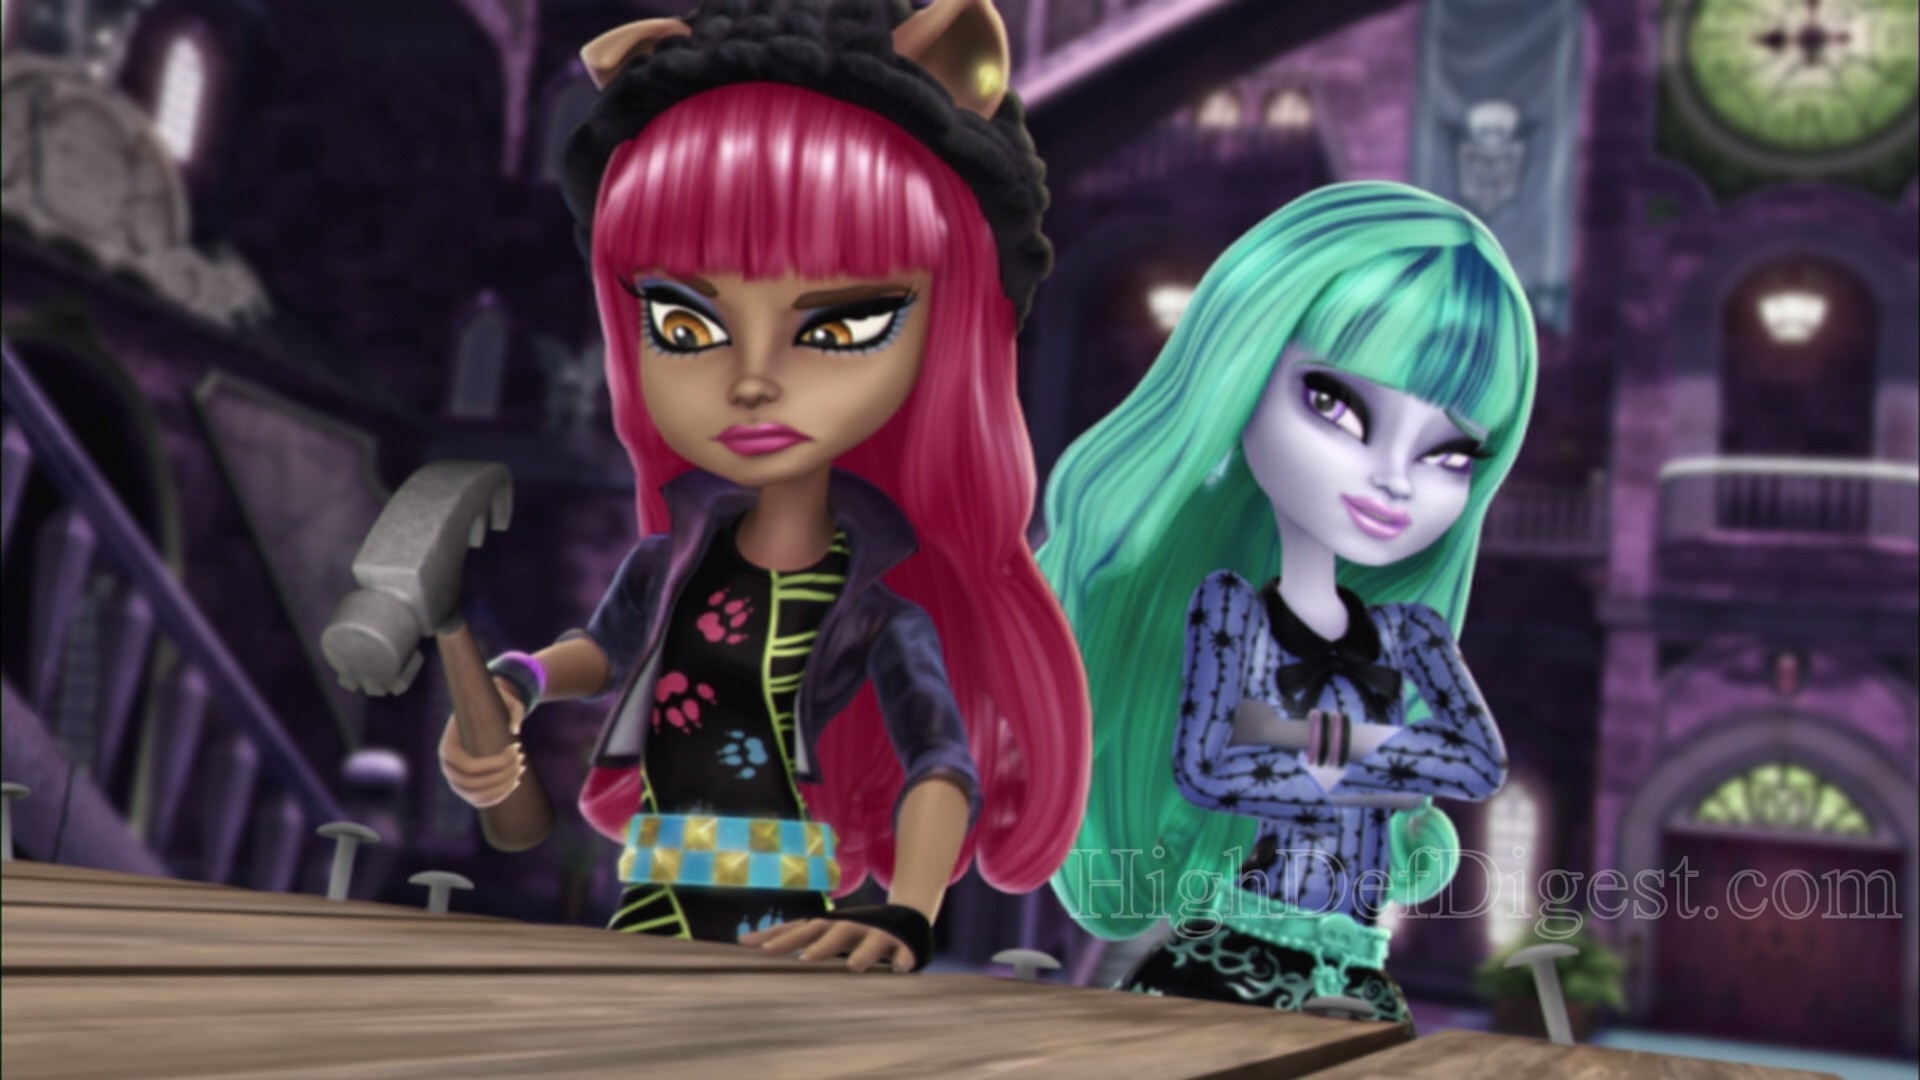 1920x1080 Monster High 13 Wishes Wallpaper